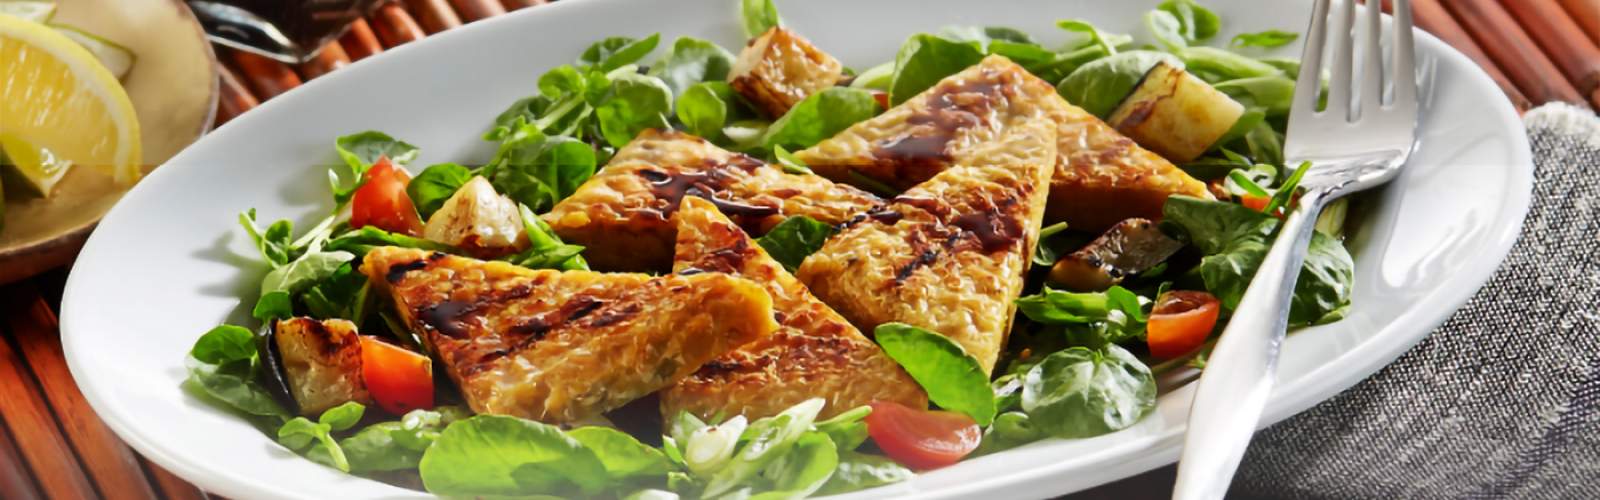 Grilled Tempeh with Roasted Eggplant & Watercress